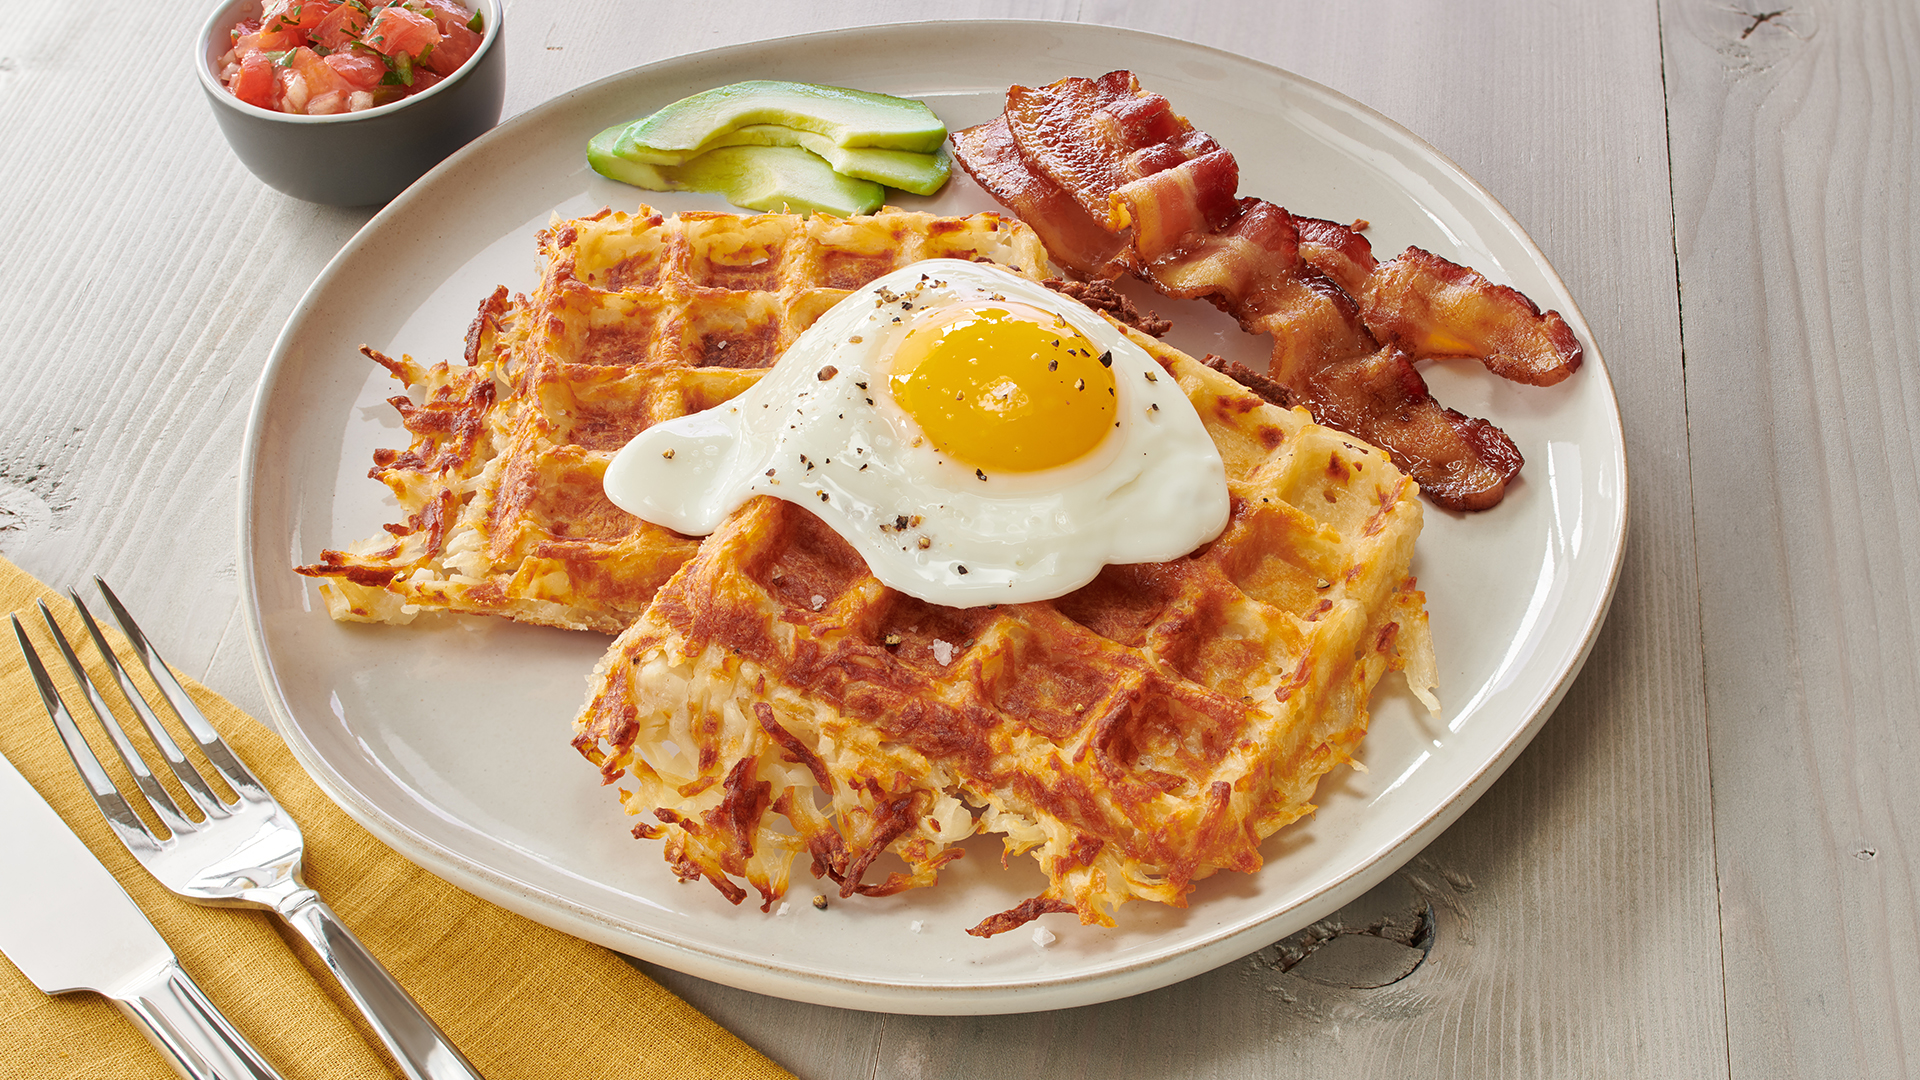 Bacon, Egg And Cheddar Hashbrown Waffles by madebyablonde